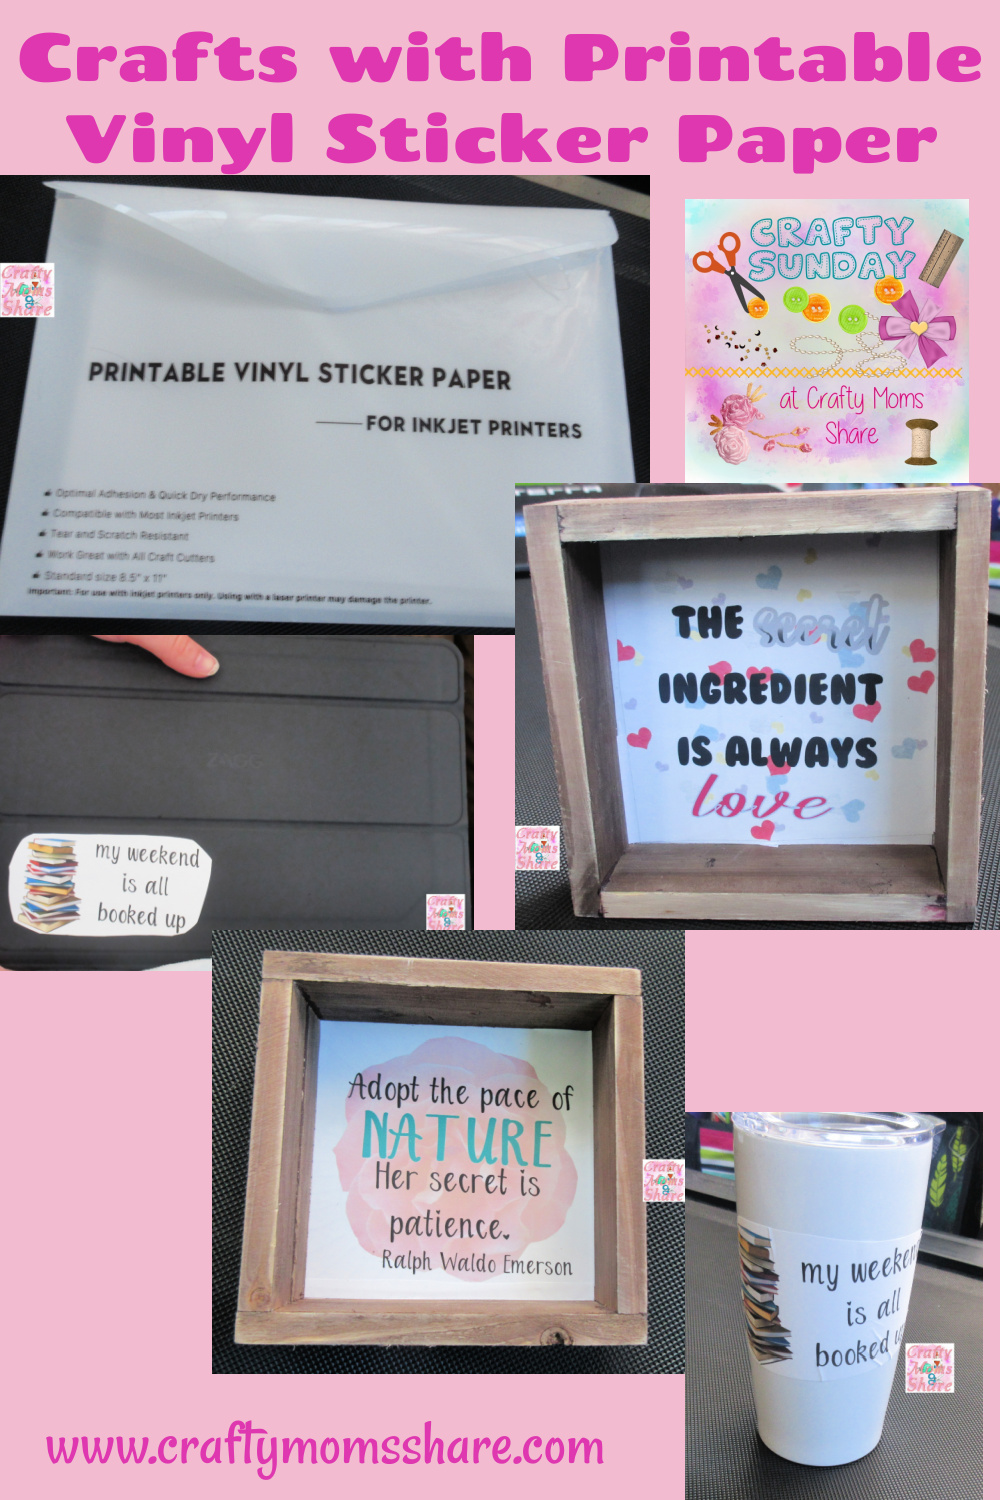 Crafty Moms Share: Printable Vinyl Sticker Paper Projects